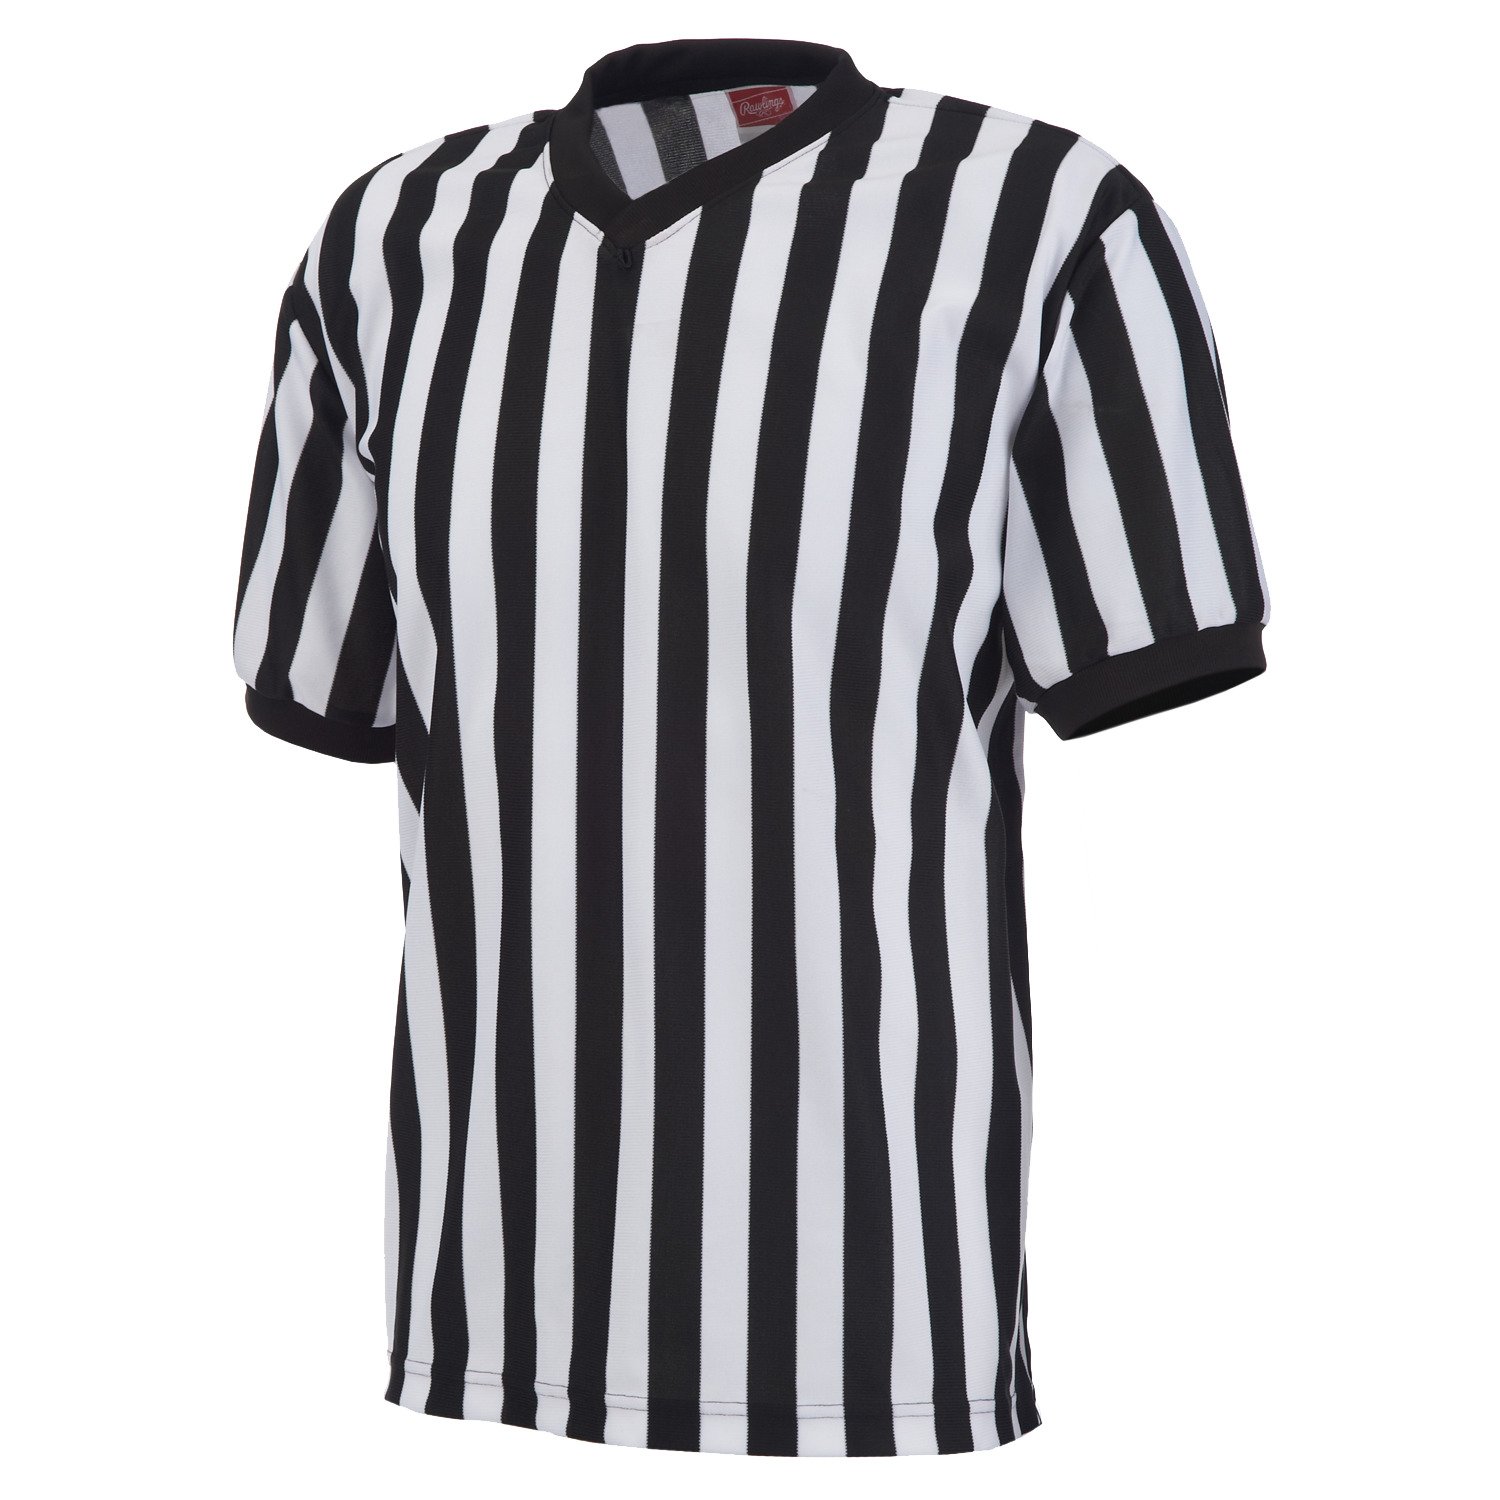 Rawlings Adults' Basketball Referee Jersey                                                                                       - view number 1 selected